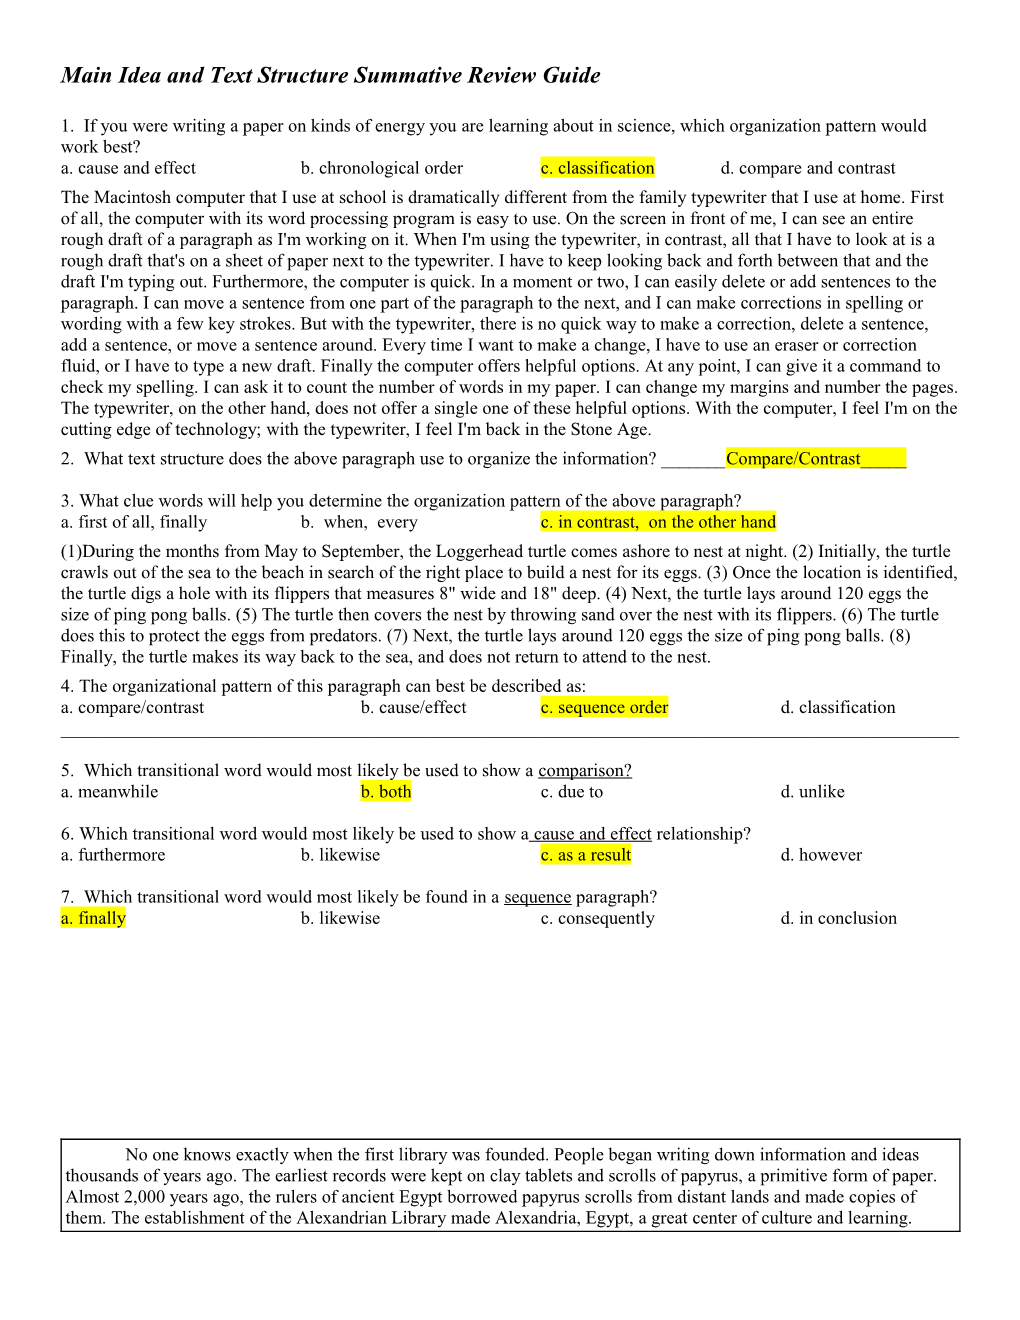 Main Idea and Text Structure Summative Review Guide